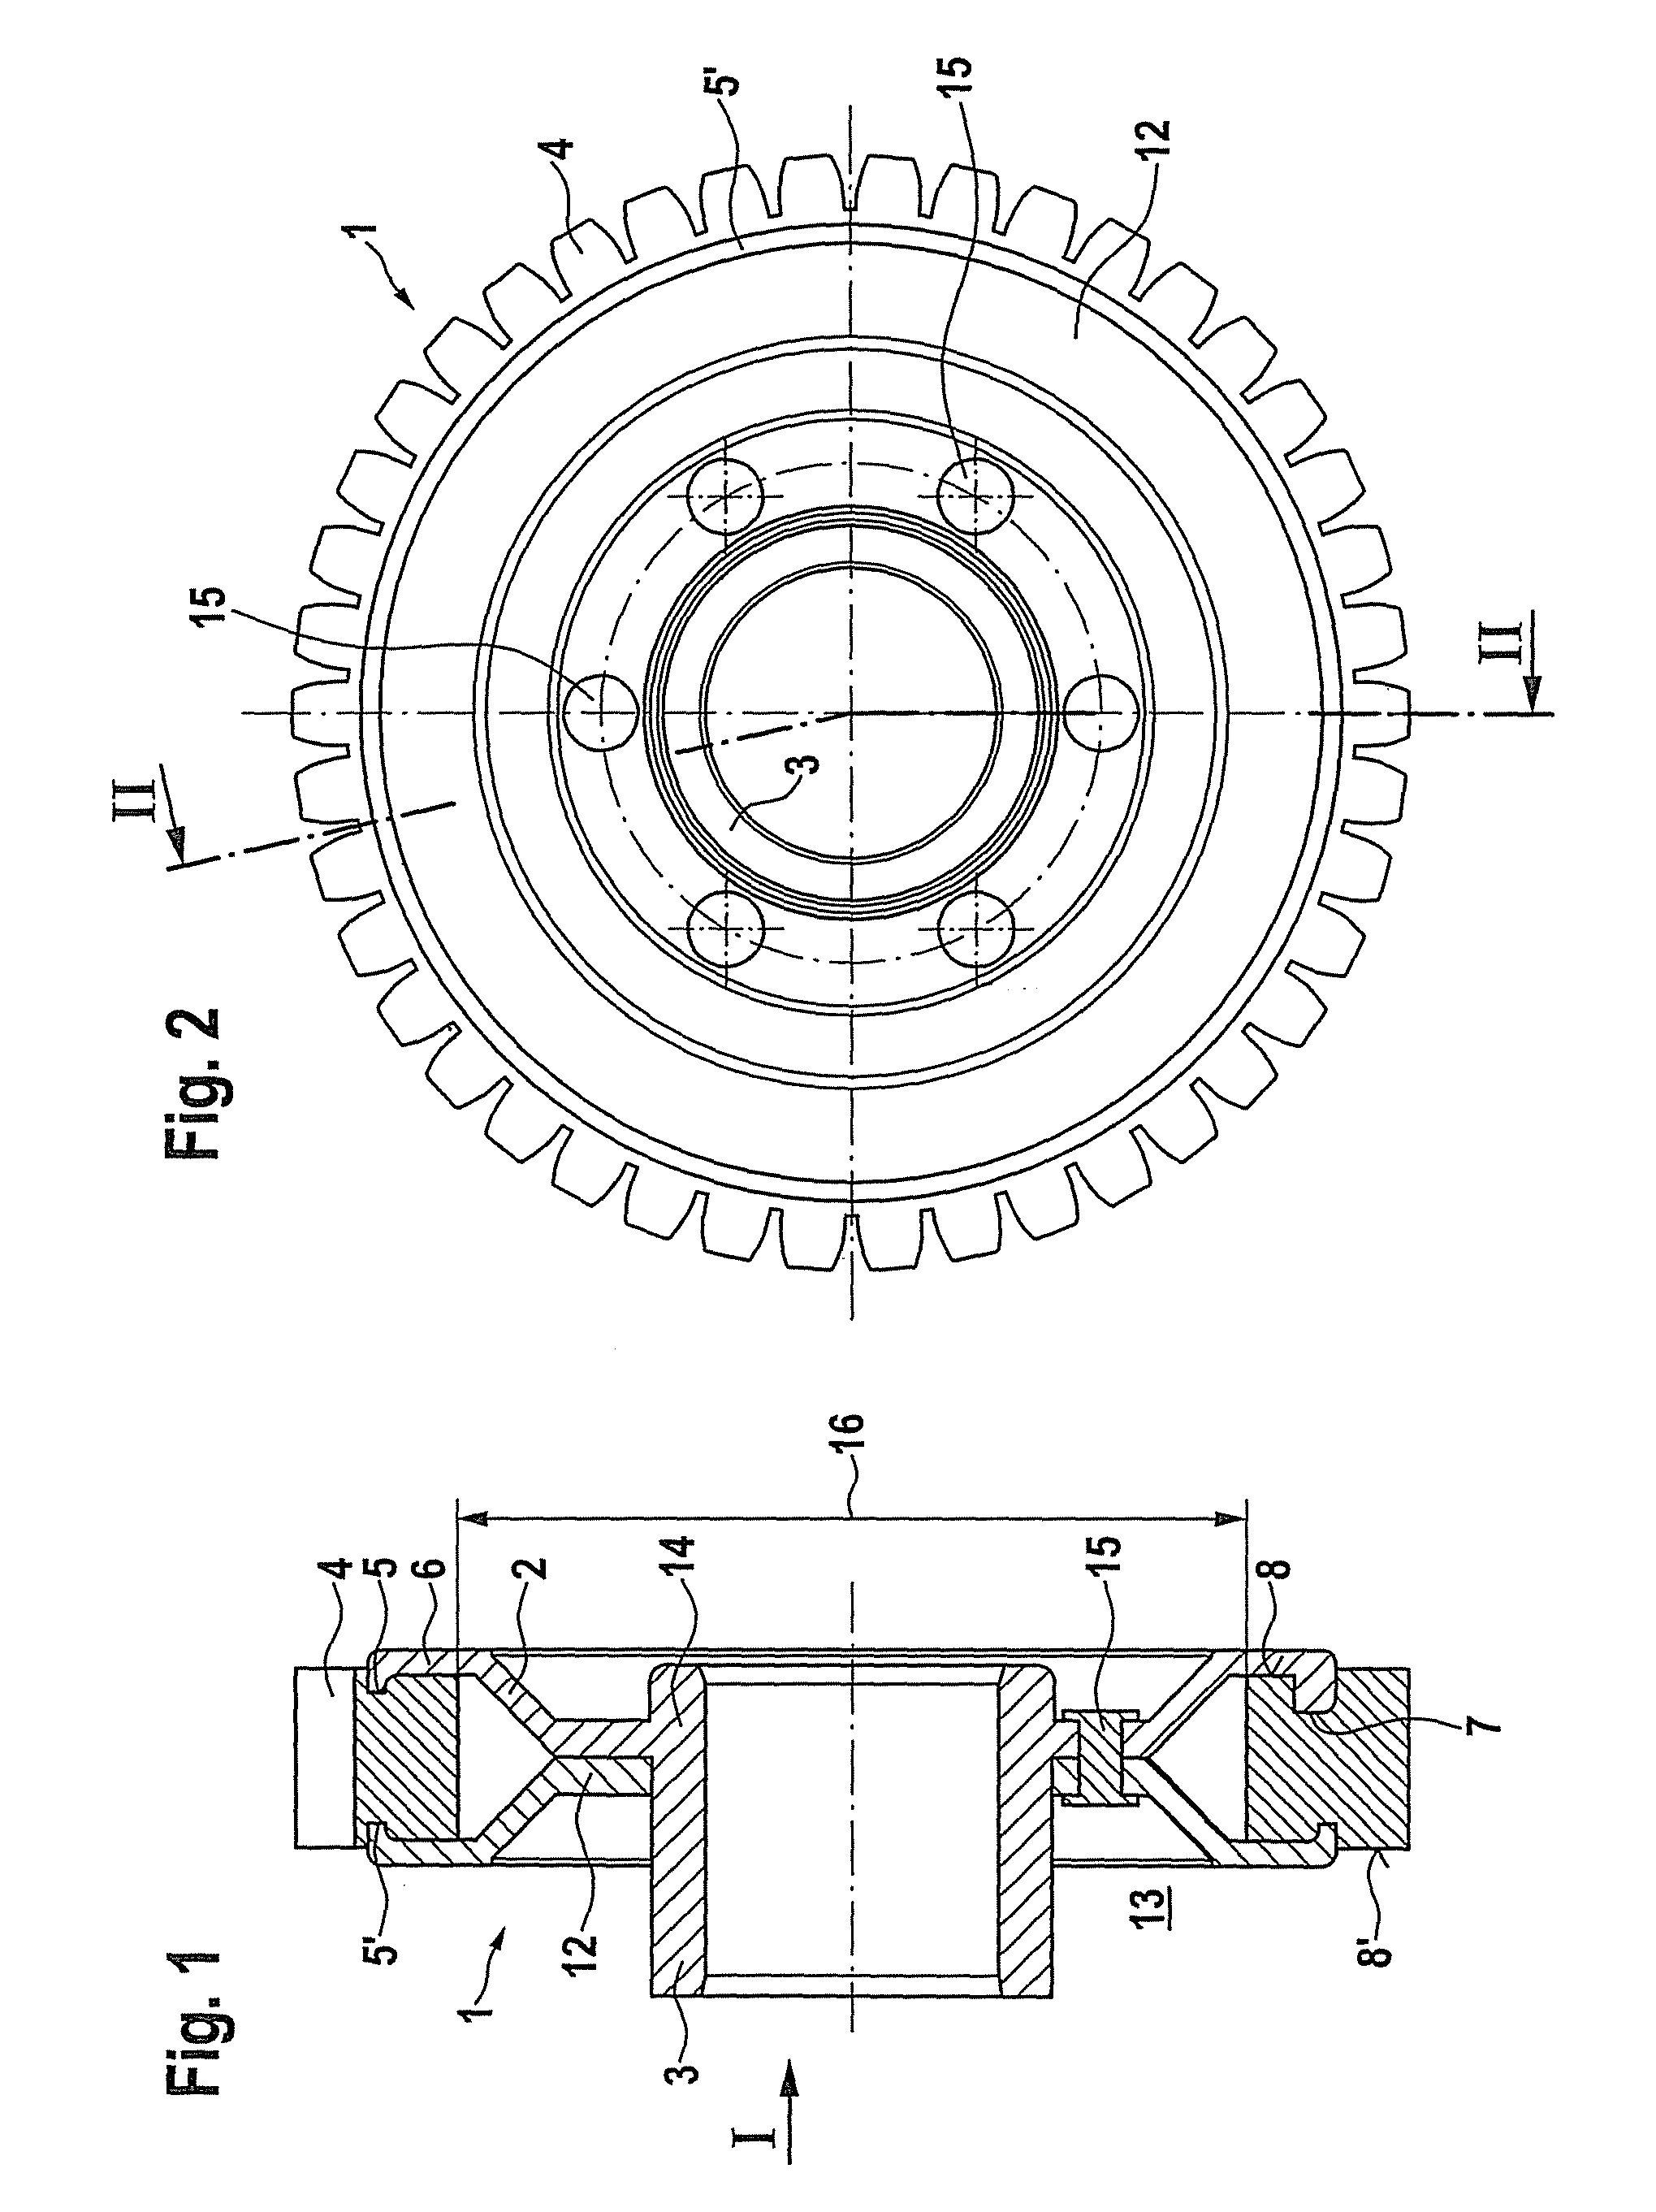 Power-assisted steering system or power steering system